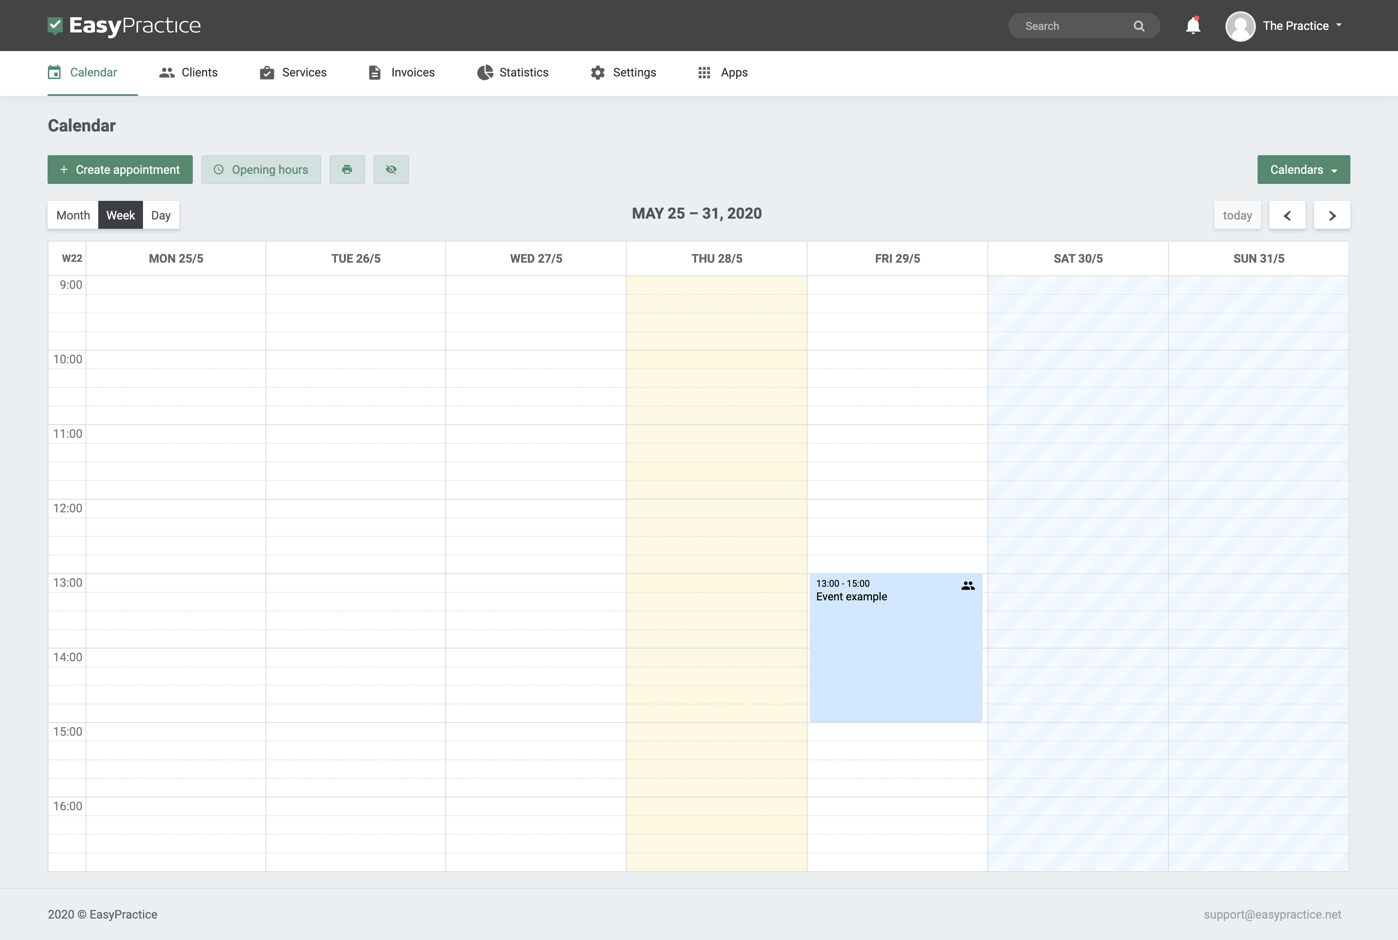 Calendar view with event